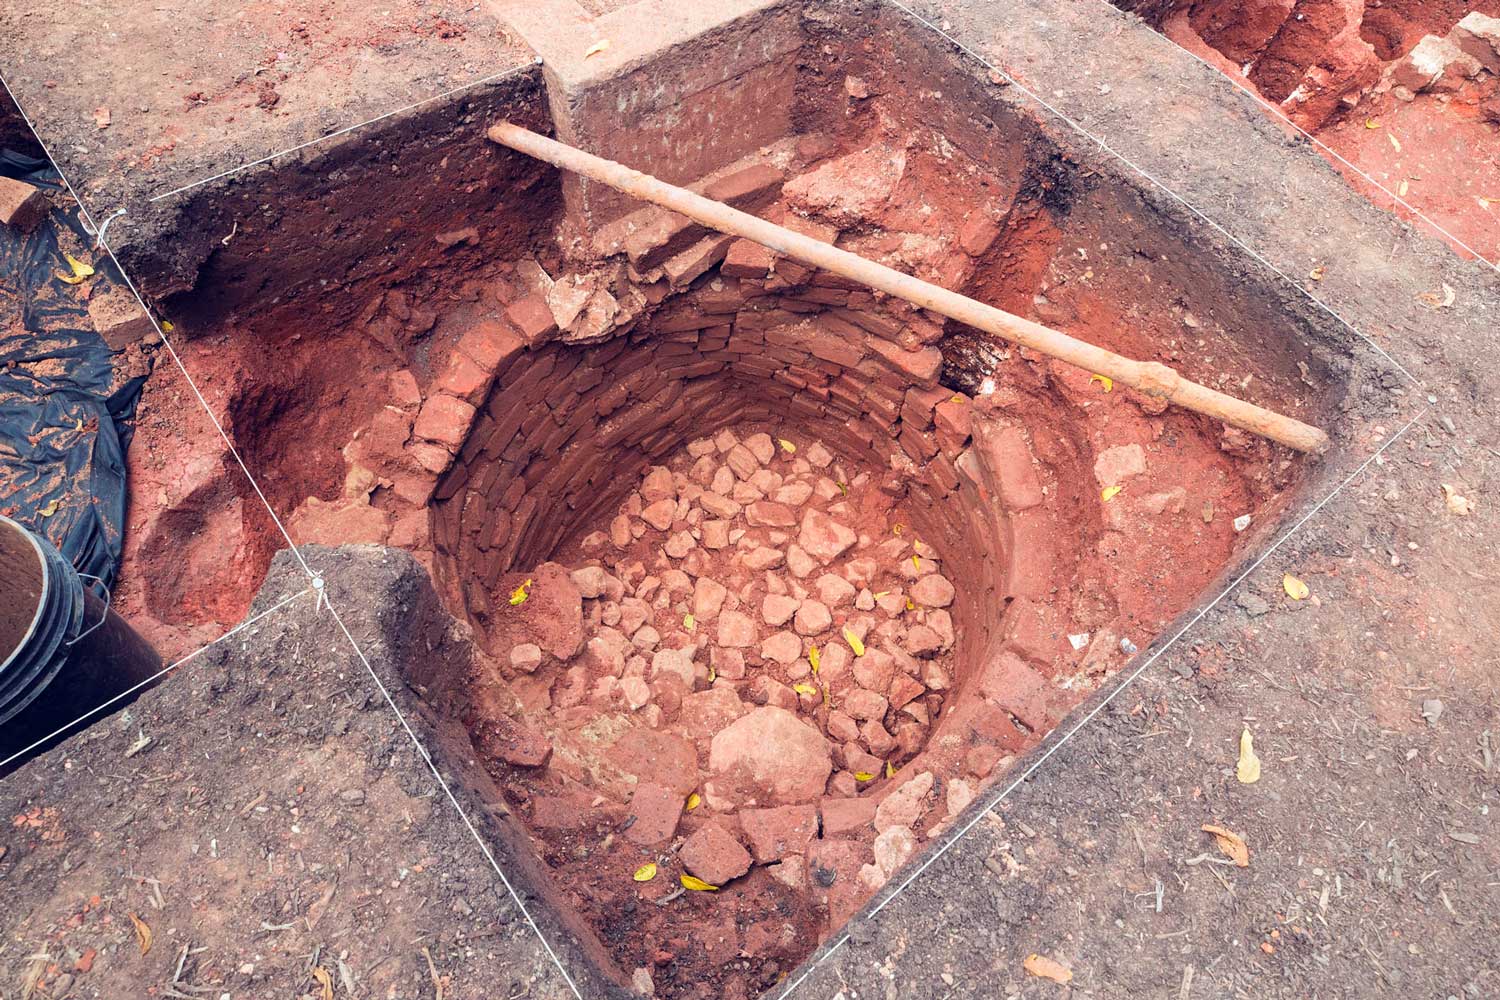 A Well was filled with stones and bricks at an archeological site at pavilion four